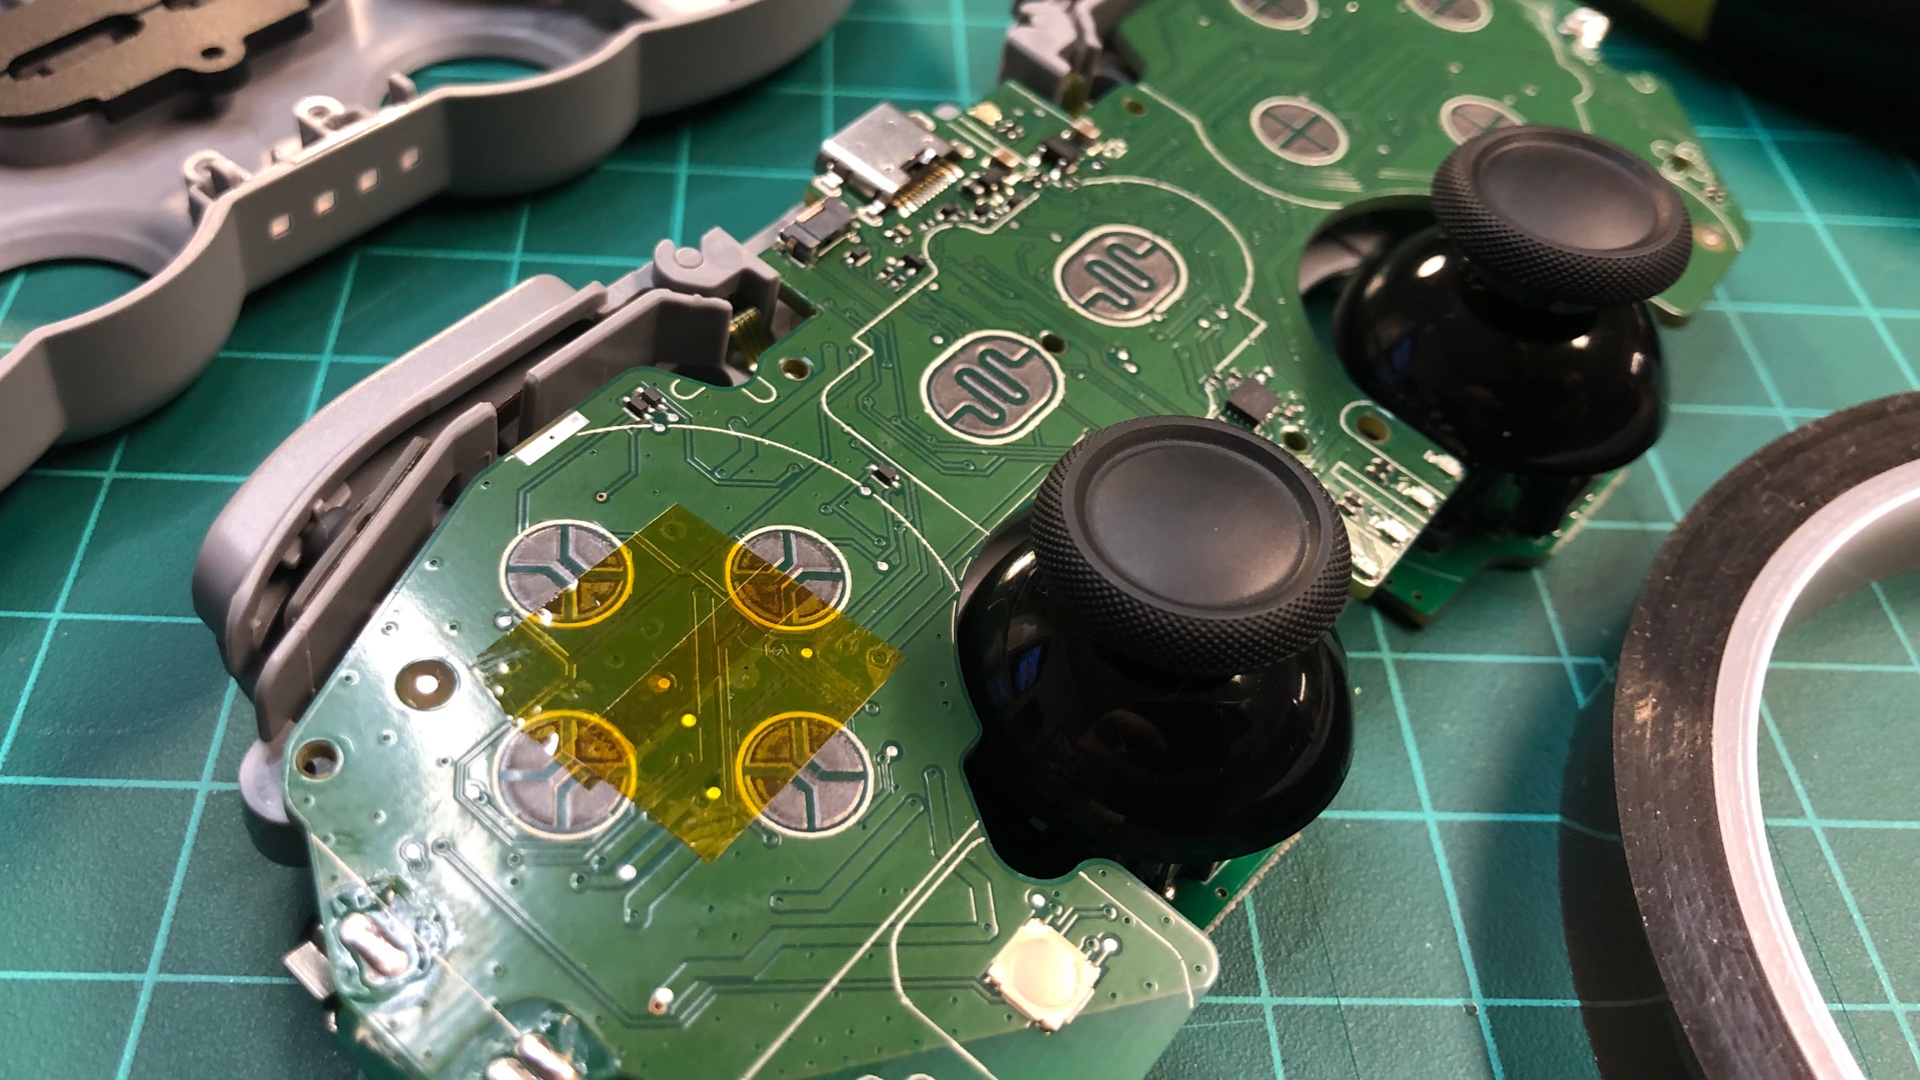 Tape on the PCB covering contacts